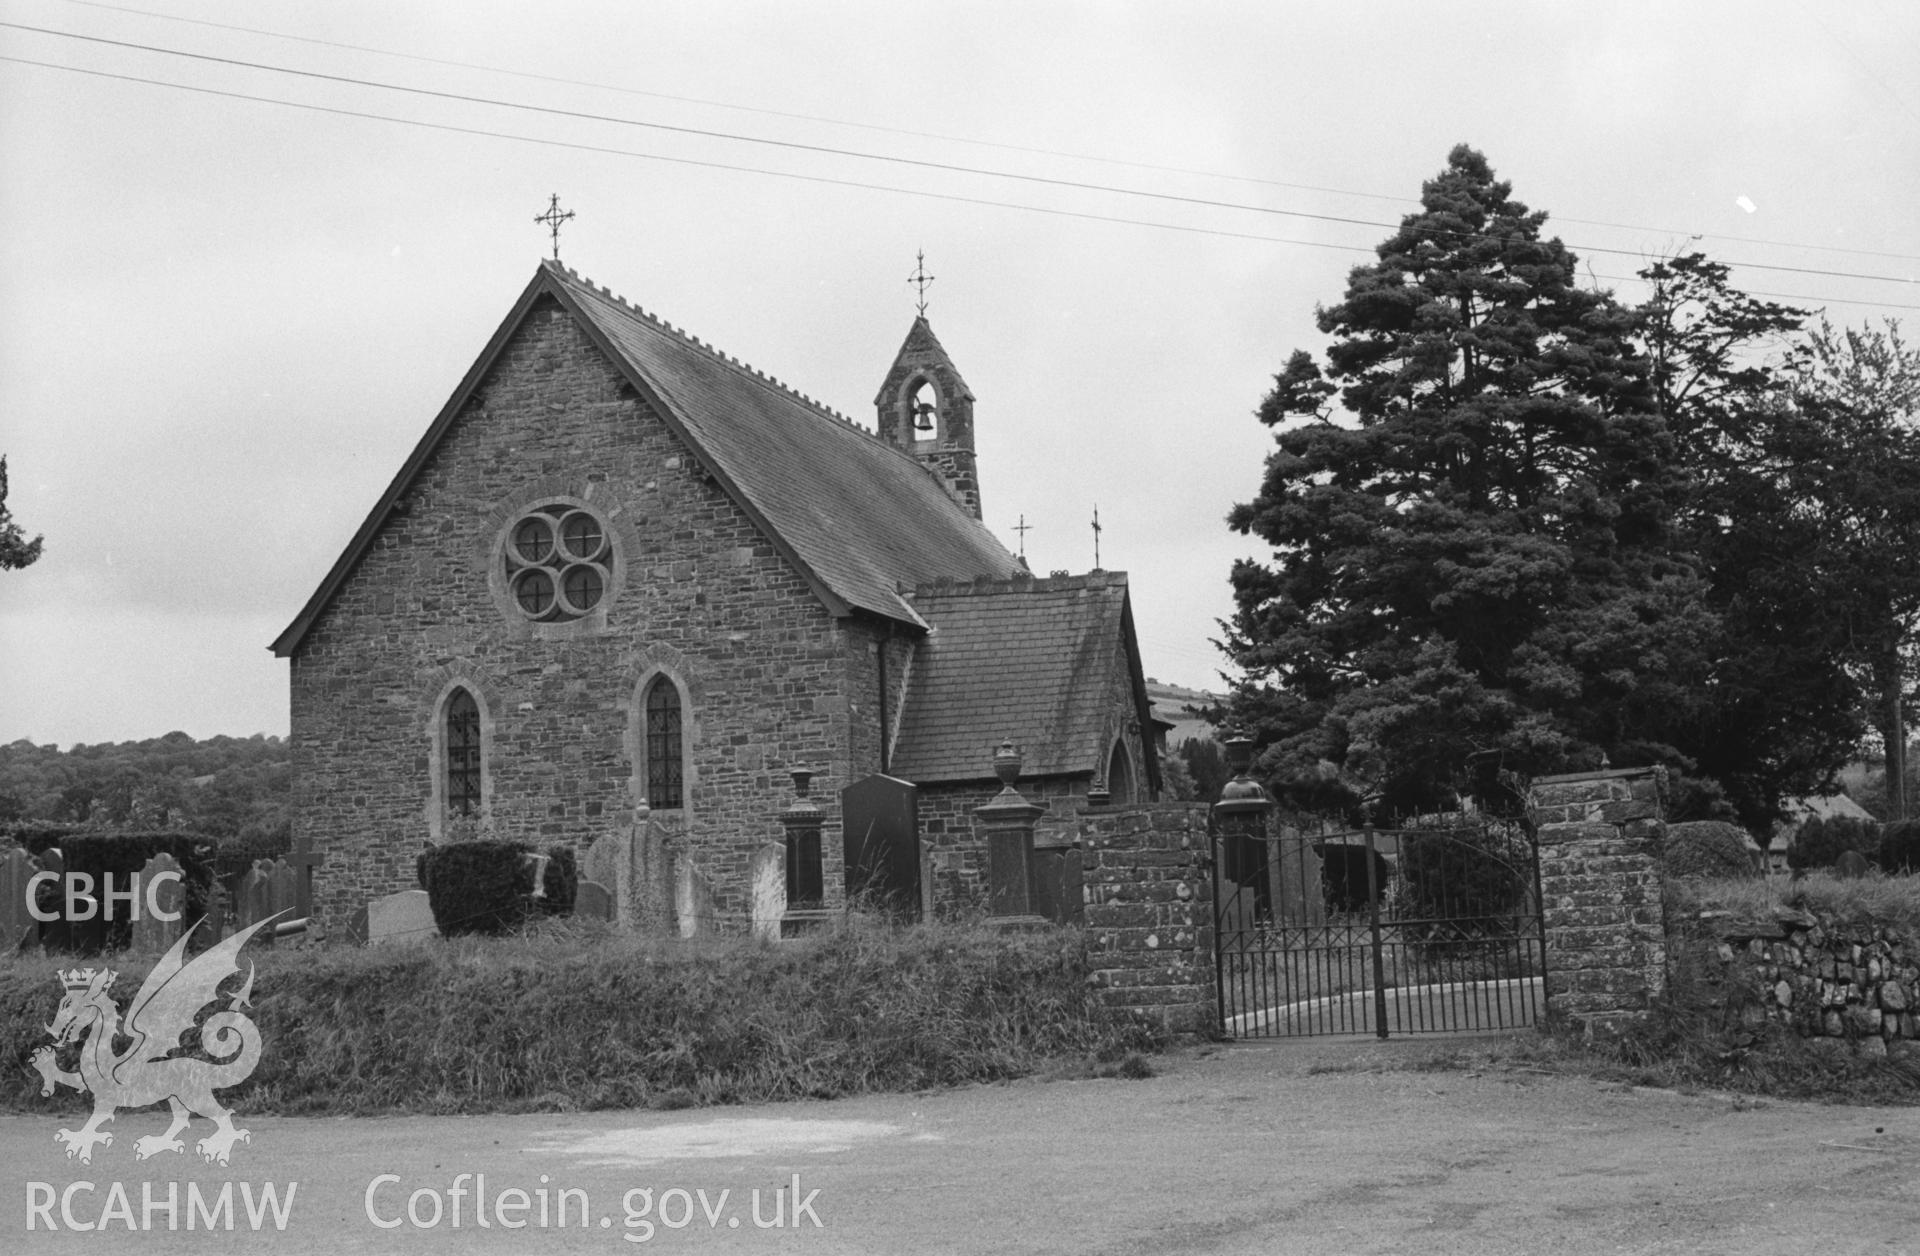 Digital copy of a black and white negative showing exterior view of St. Hilary's church, Trefilan. Photographed by Arthur O. Chater in September 1964 from Grid Reference SN 5492 5715, looking north east.